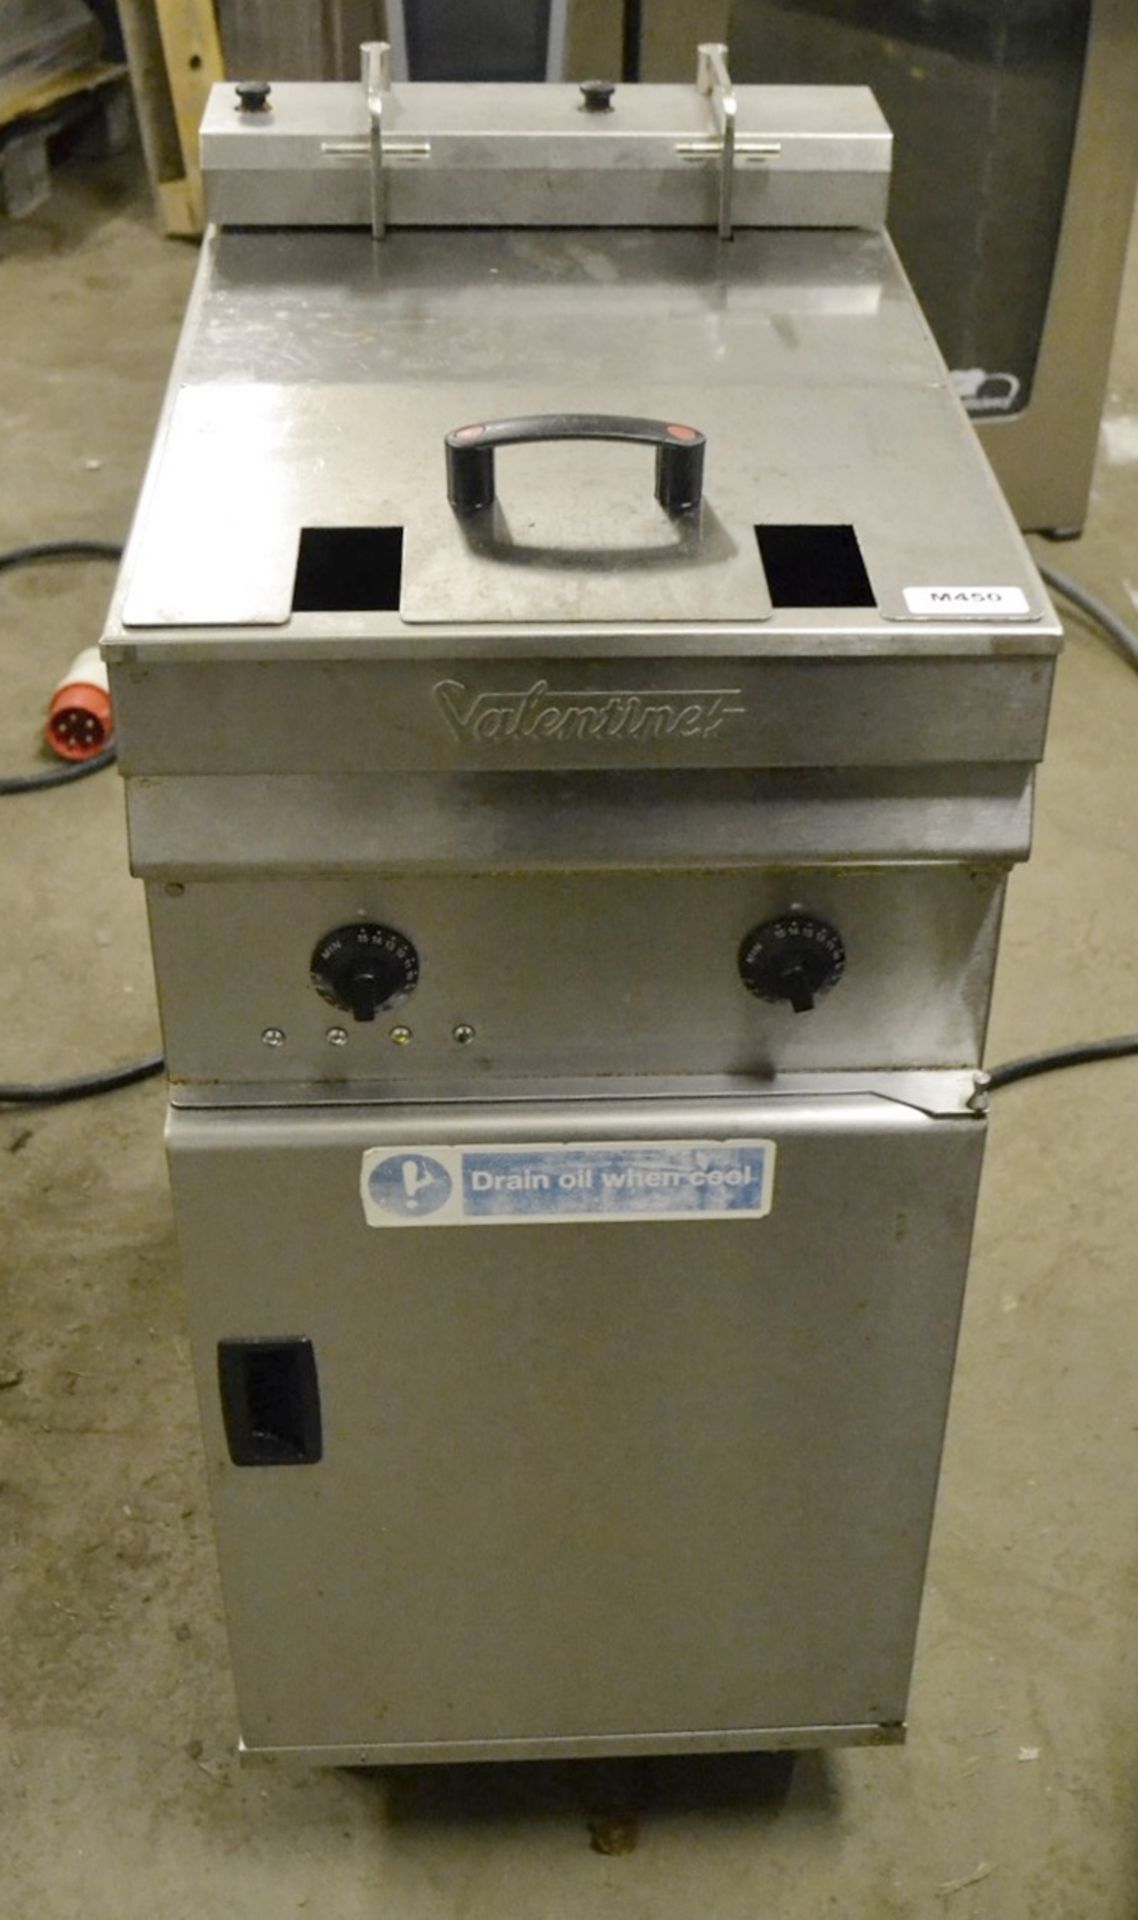 1 x Valentine Freestanding Electric Twin Basket Fryer - Approx 15 Litre Capacity - Easy Clean Stainl